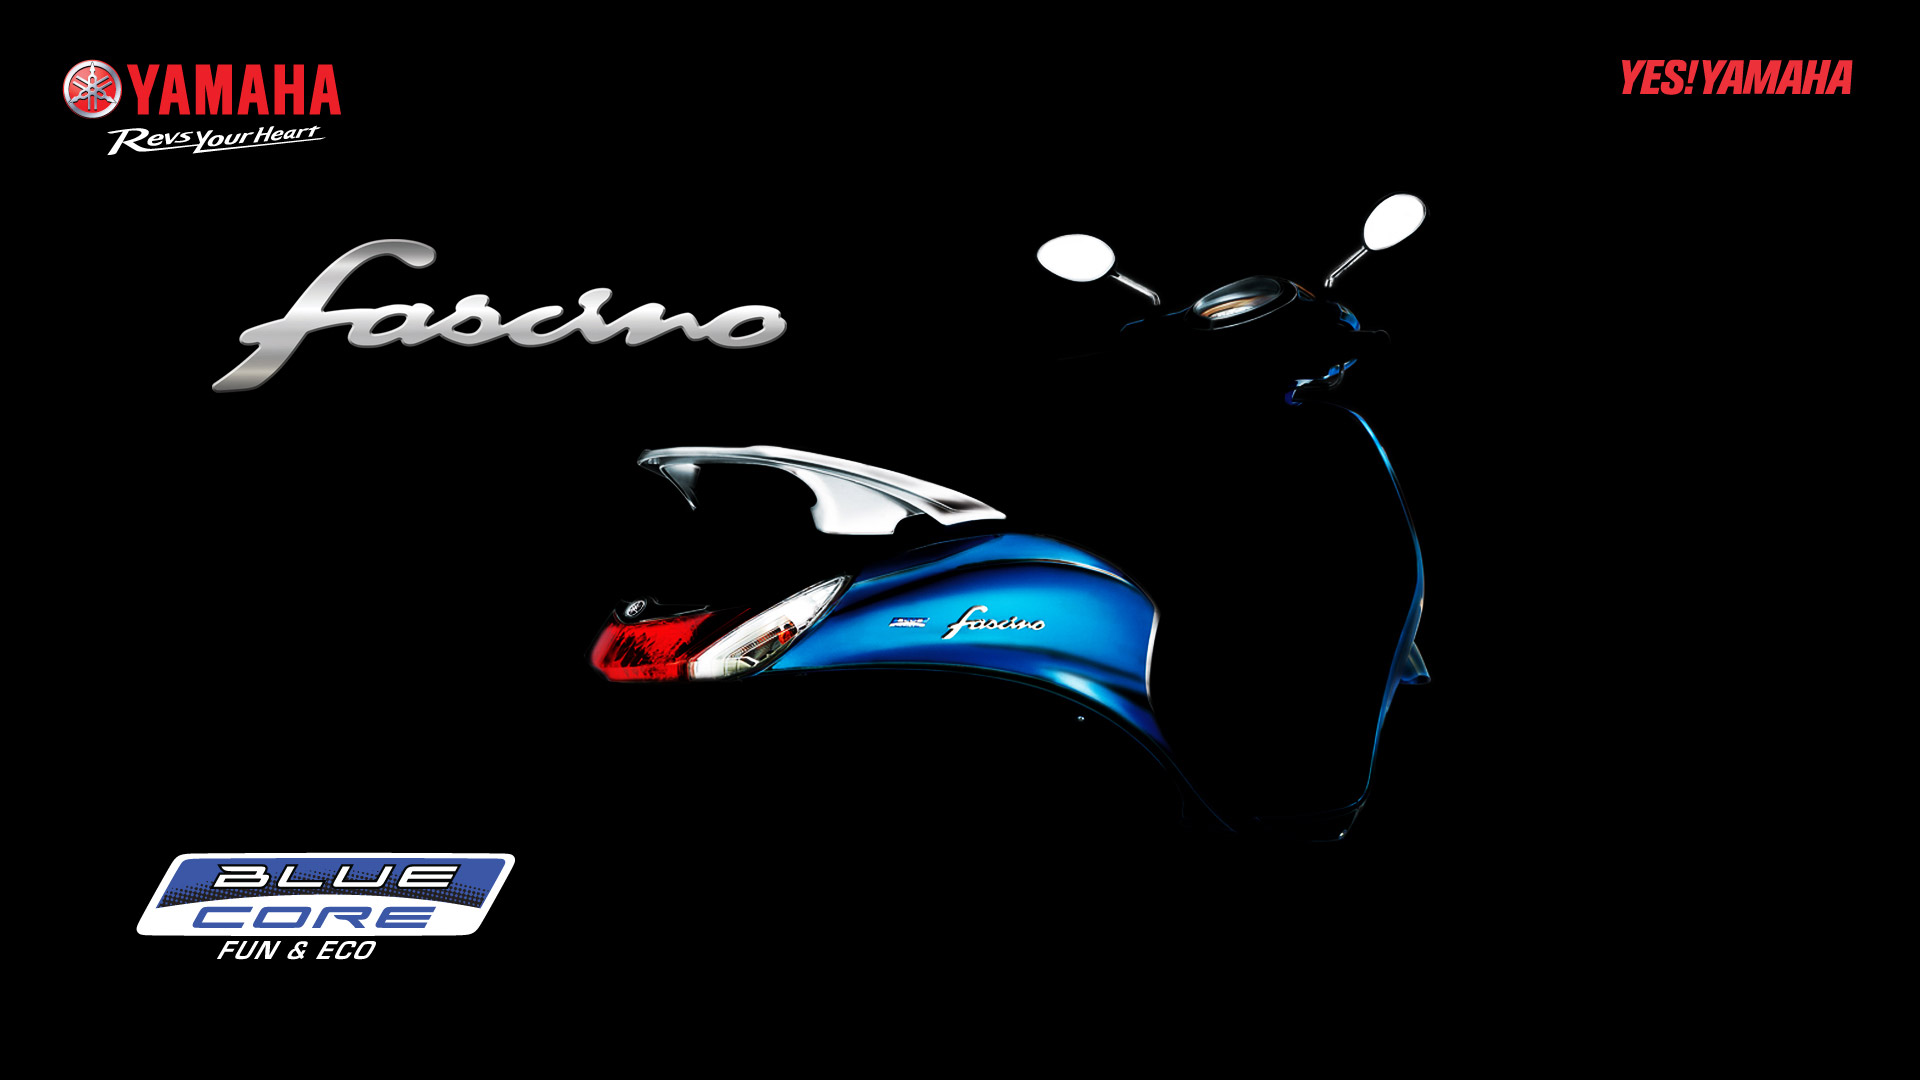 Yamaha Fascino Price, Specs, Mileage, Reviews, Images